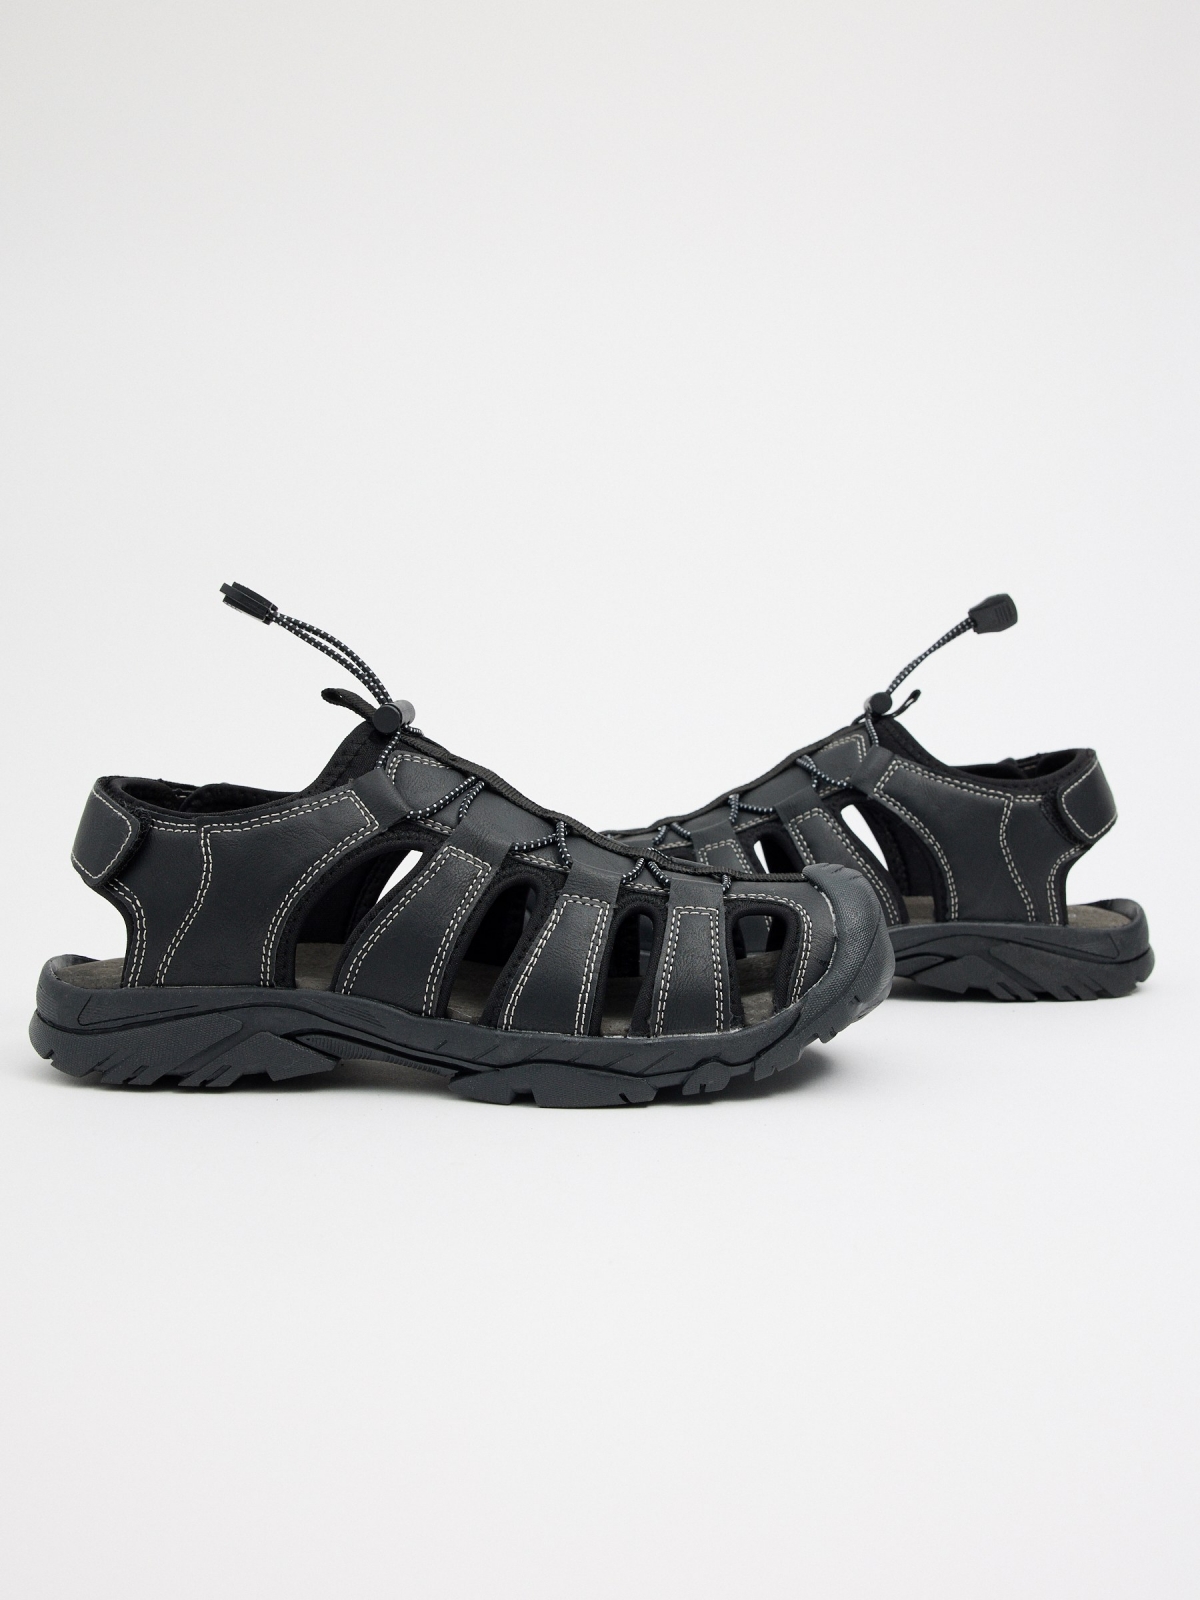 Leather-effect crab sandals black detail view